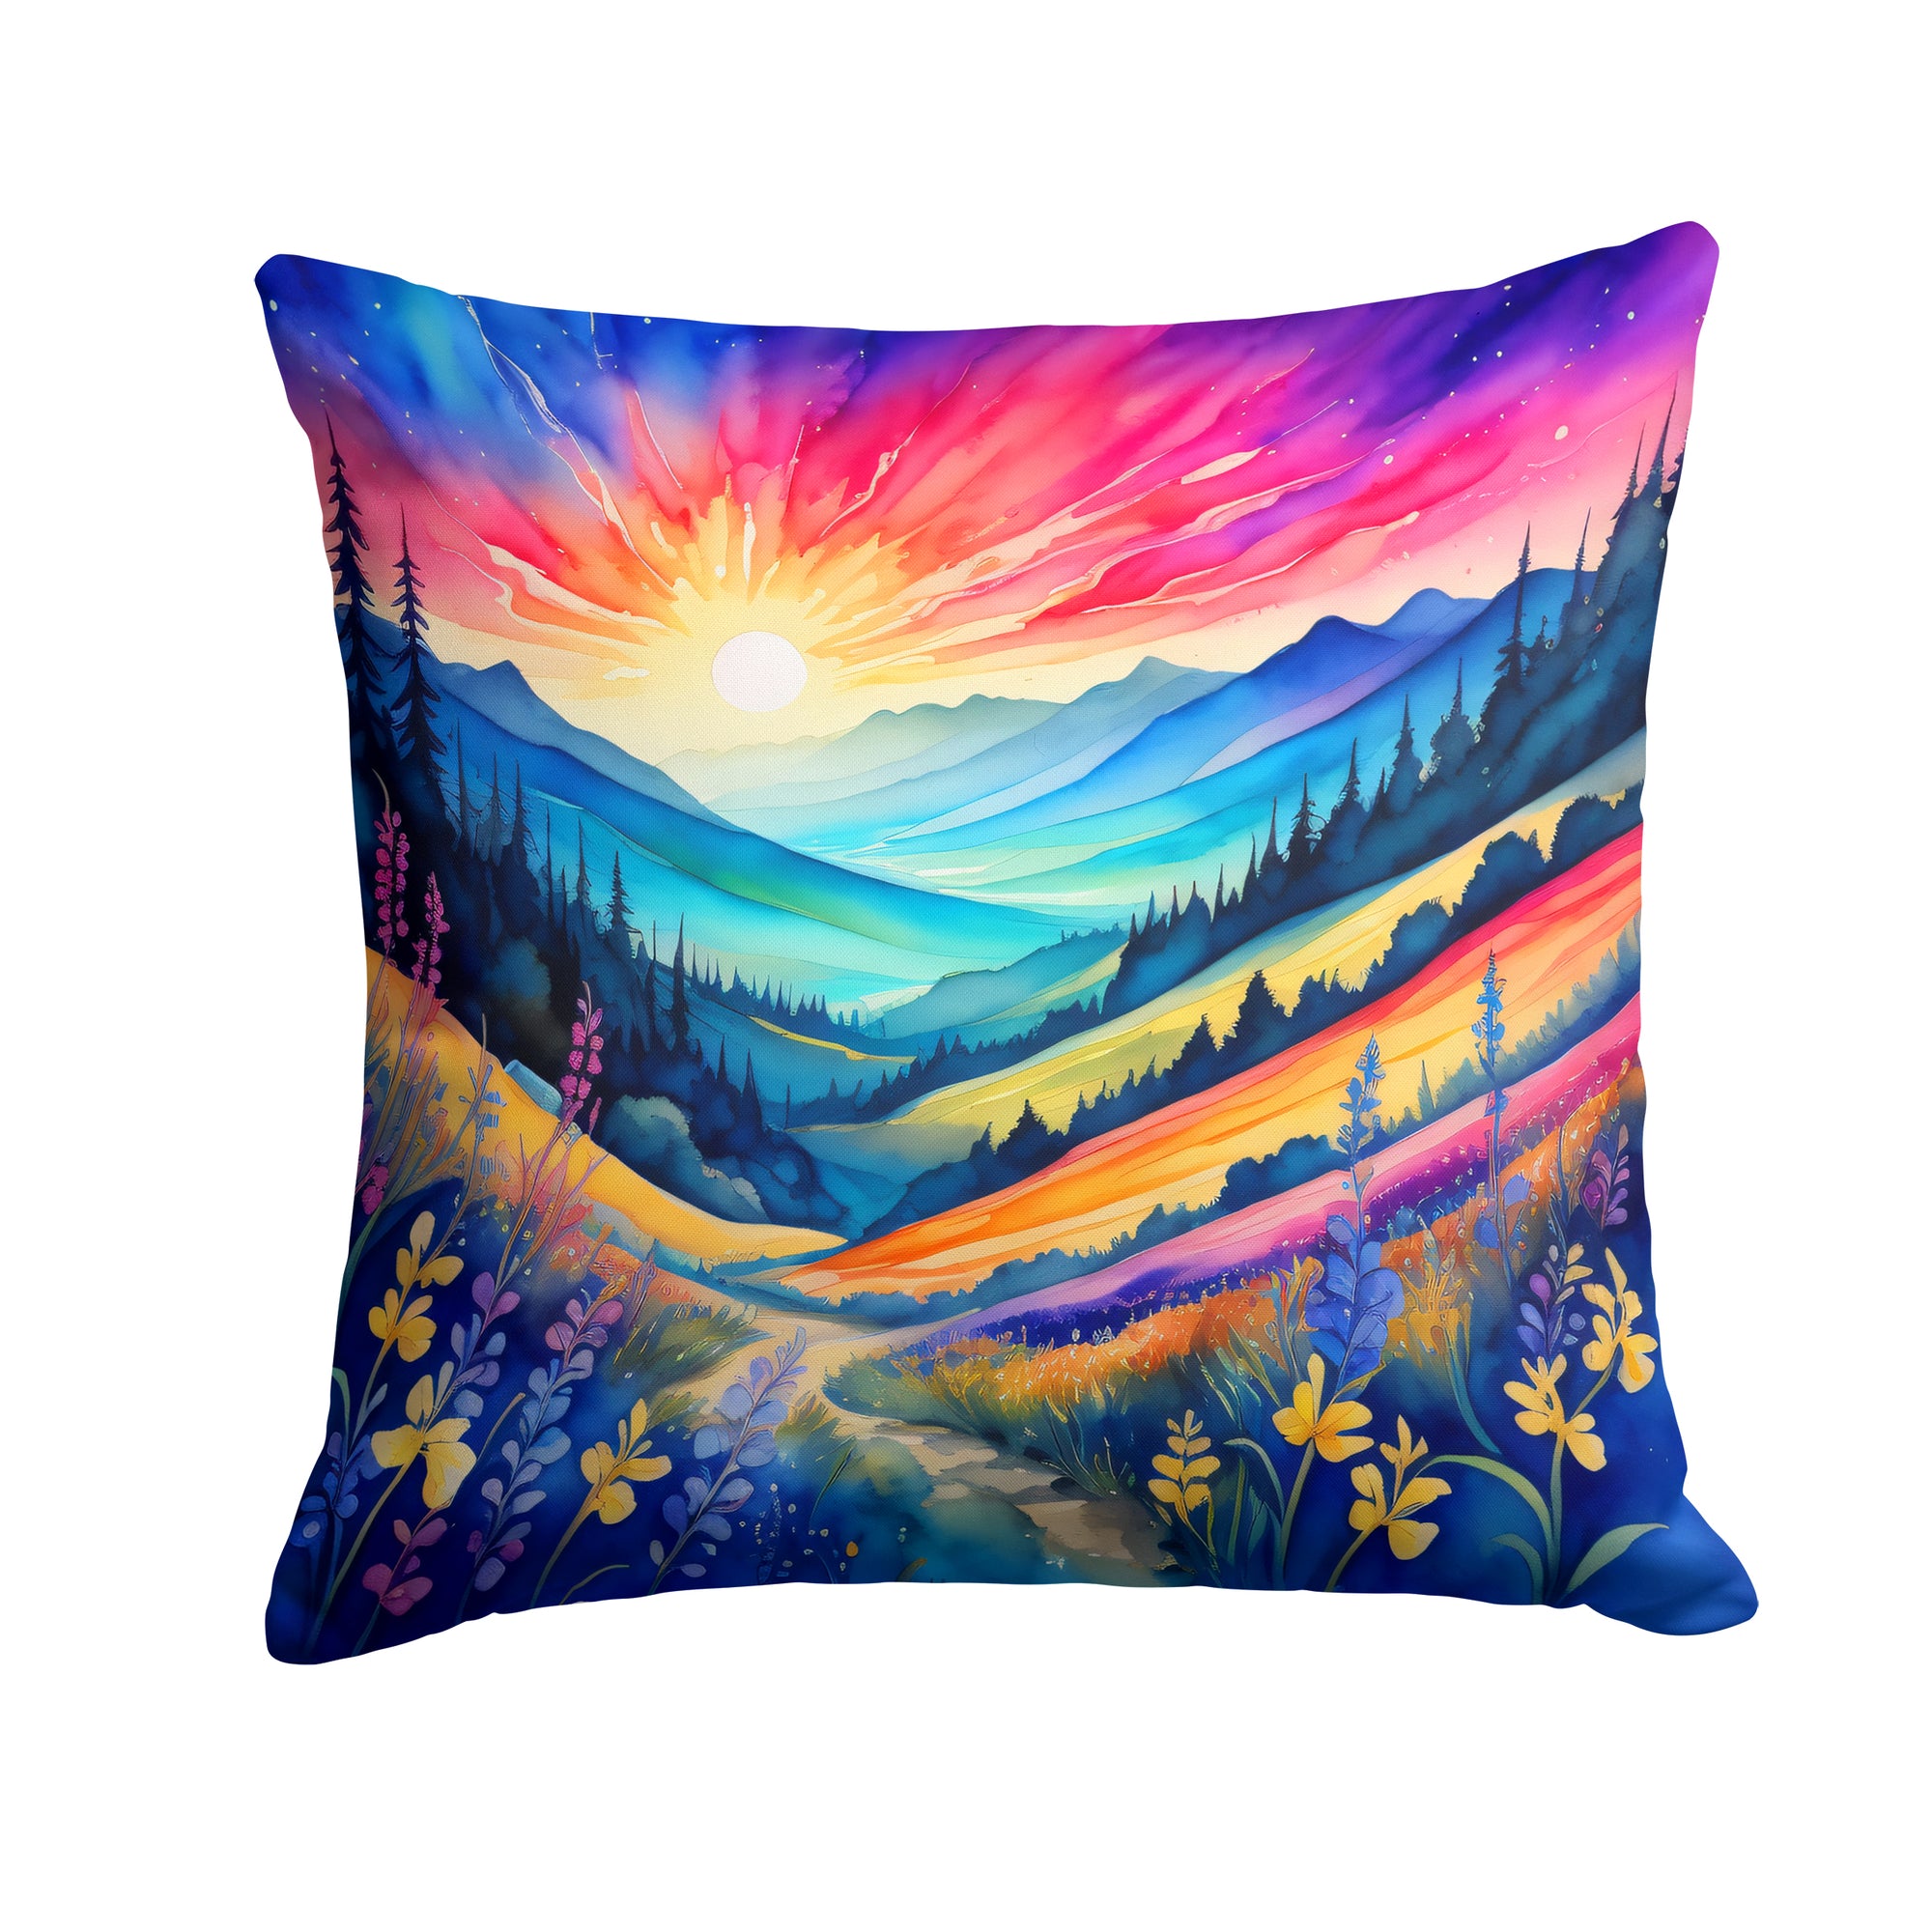 Buy this Colorful Annual Larkspur Fabric Decorative Pillow